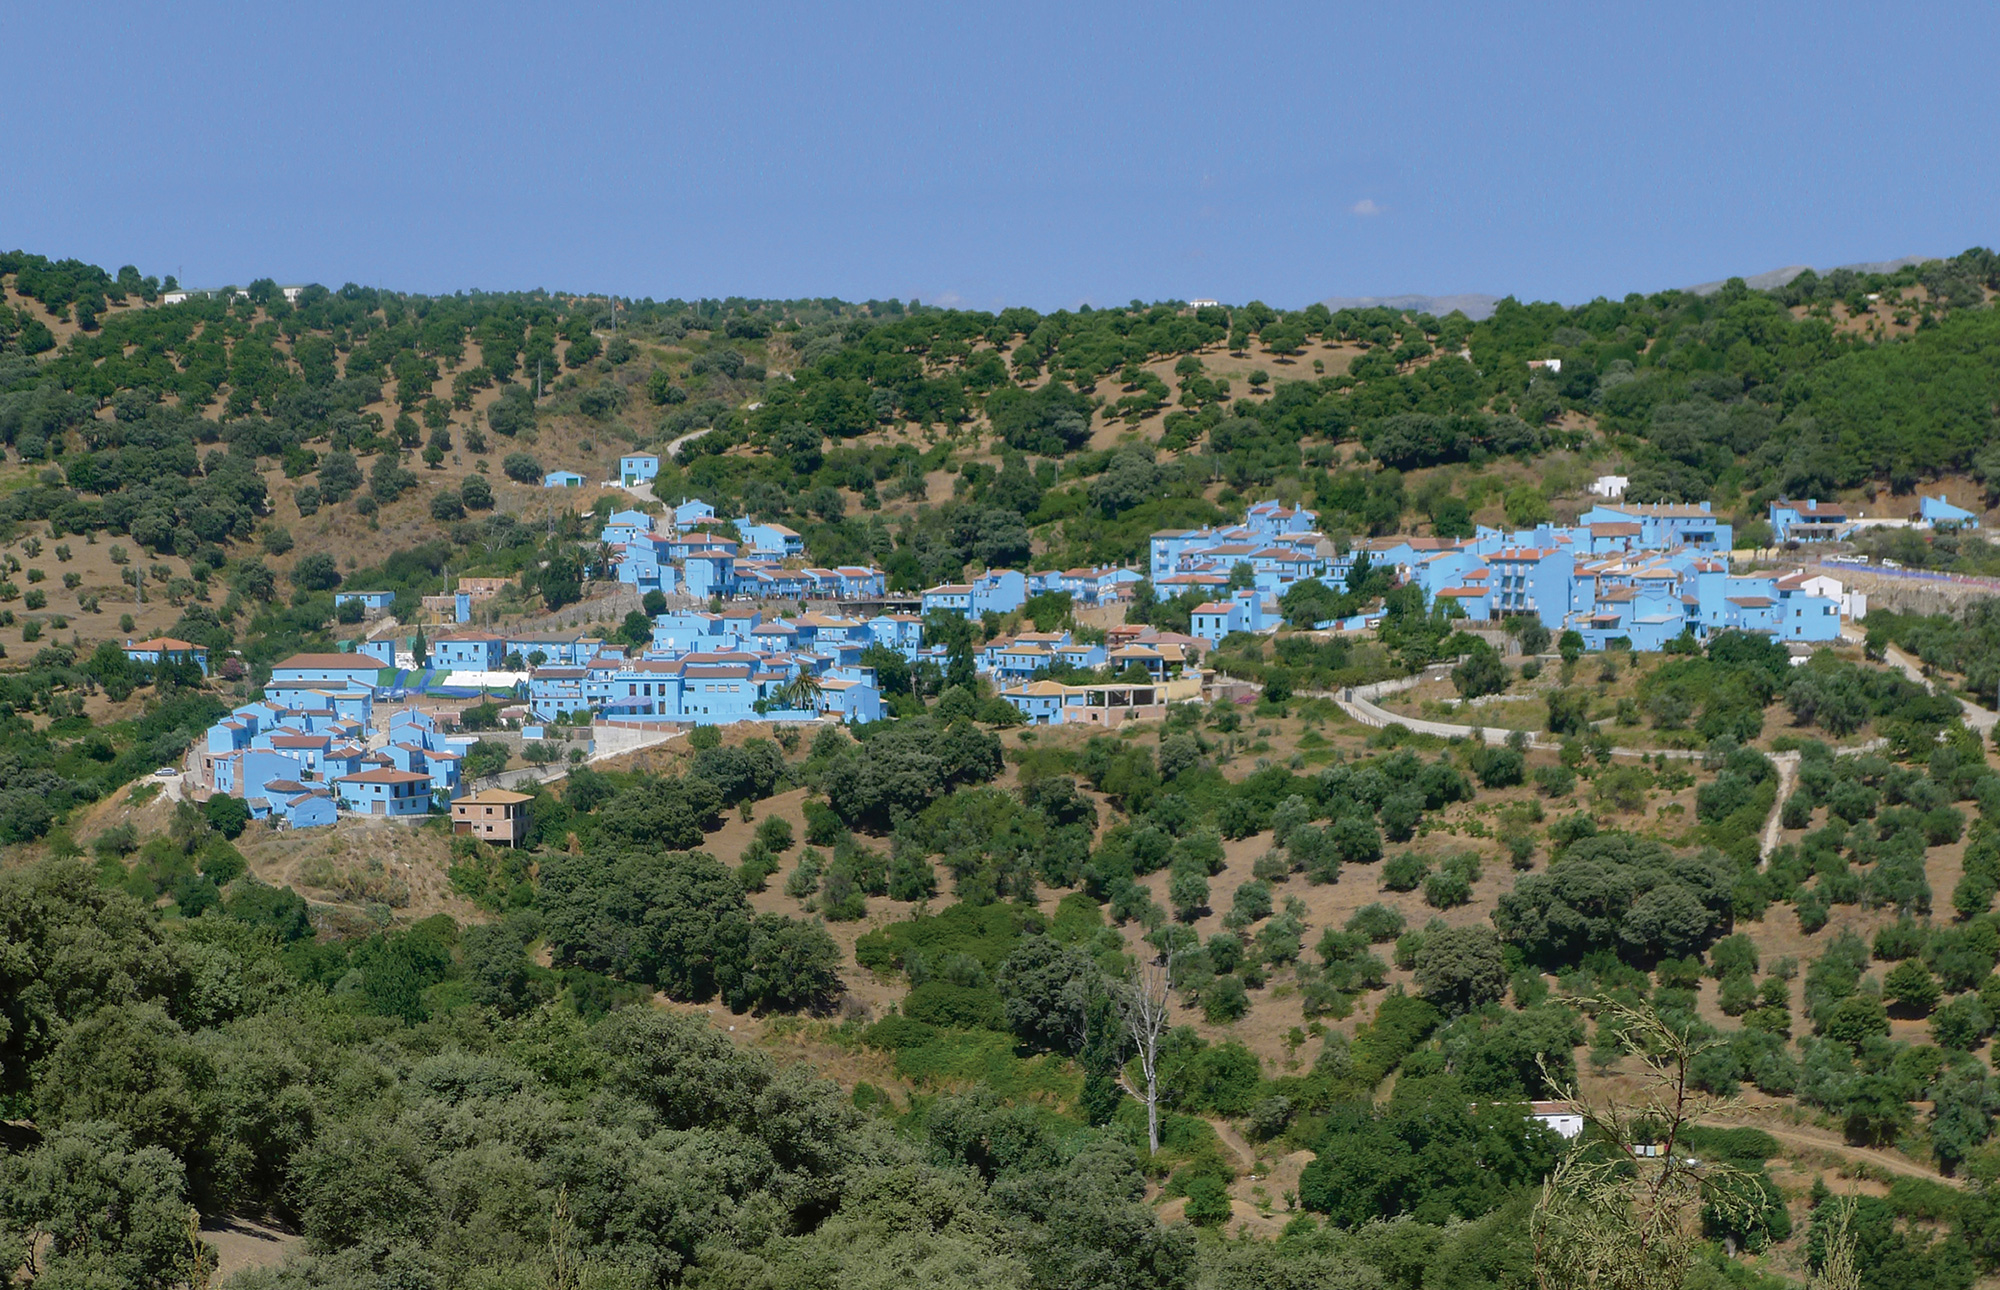 A photograph of the southern Spanish village of Júzcar, post-Smurfification. All the buildings on this hillside are painted Smurf blue.